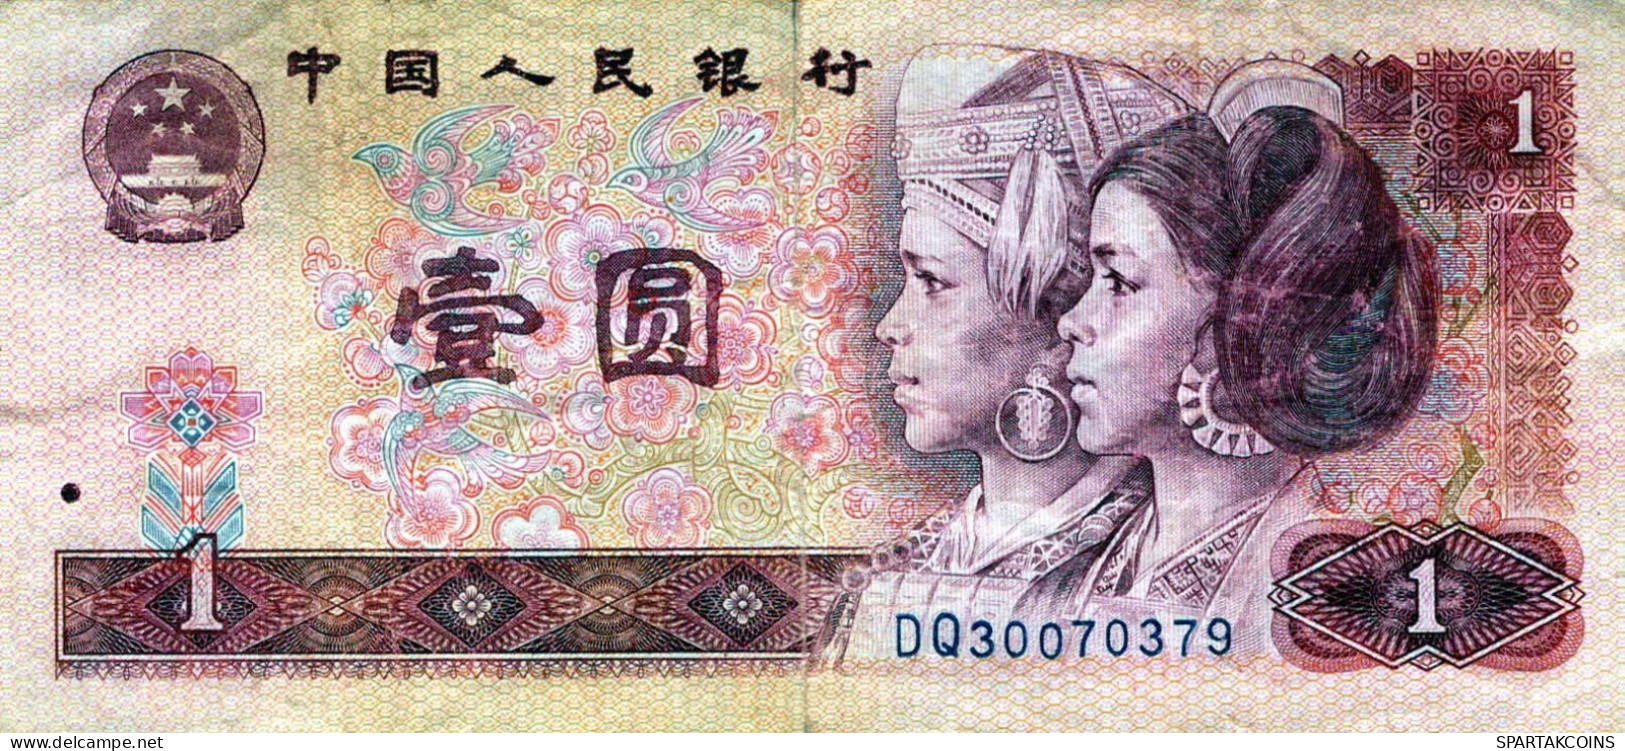 1 YUAN 1980 CHINESISCH Papiergeld Banknote #PK638 - [11] Local Banknote Issues